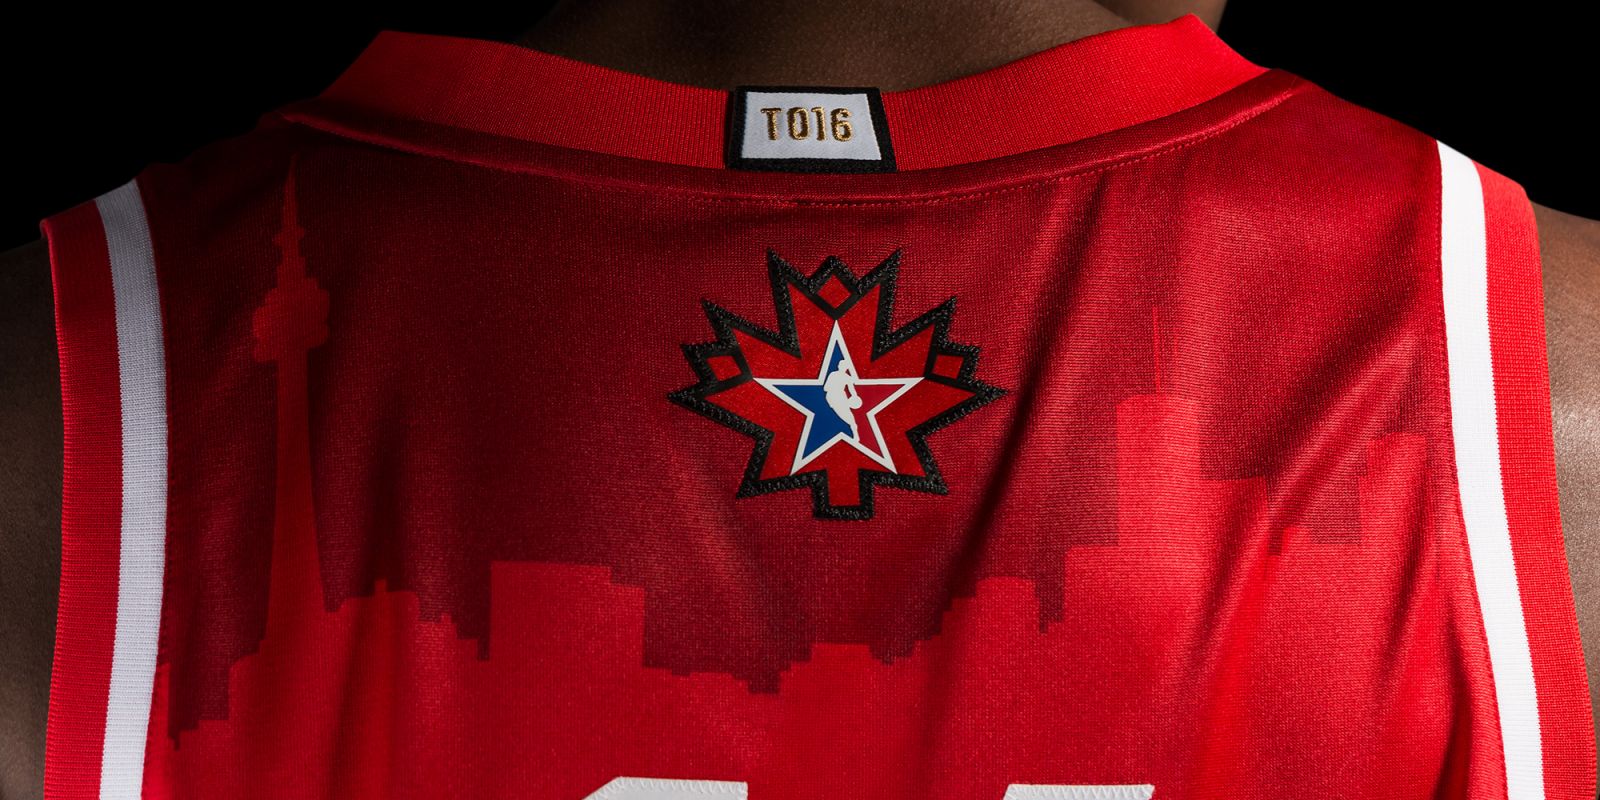 Here Are the 2016 NBA All-Star Jerseys